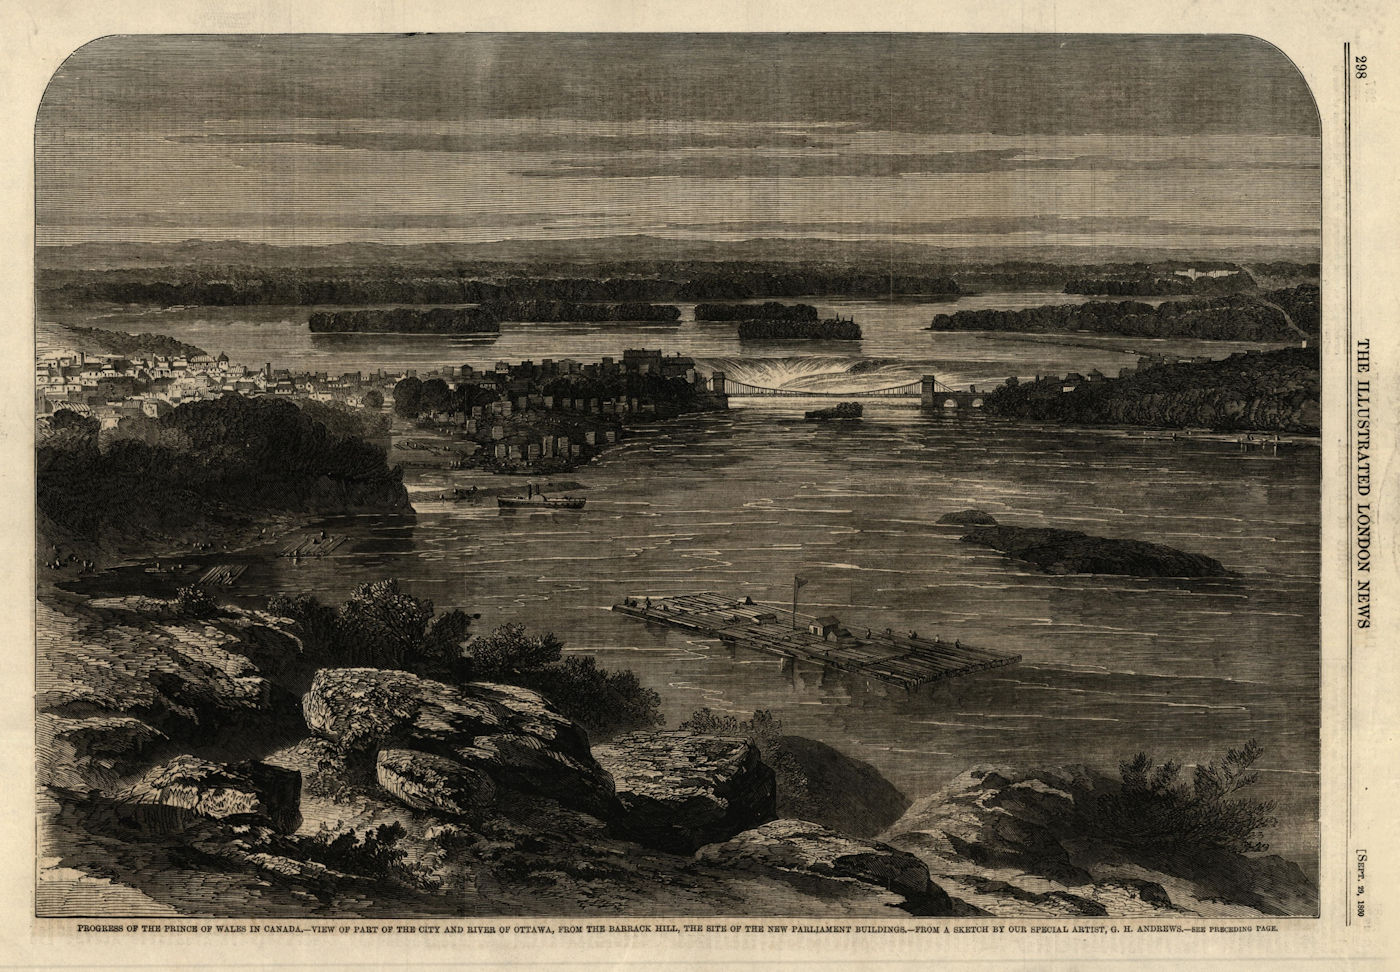 Associate Product The city & river of Ottawa, from the Barrack Hill. New parliament buildings 1860